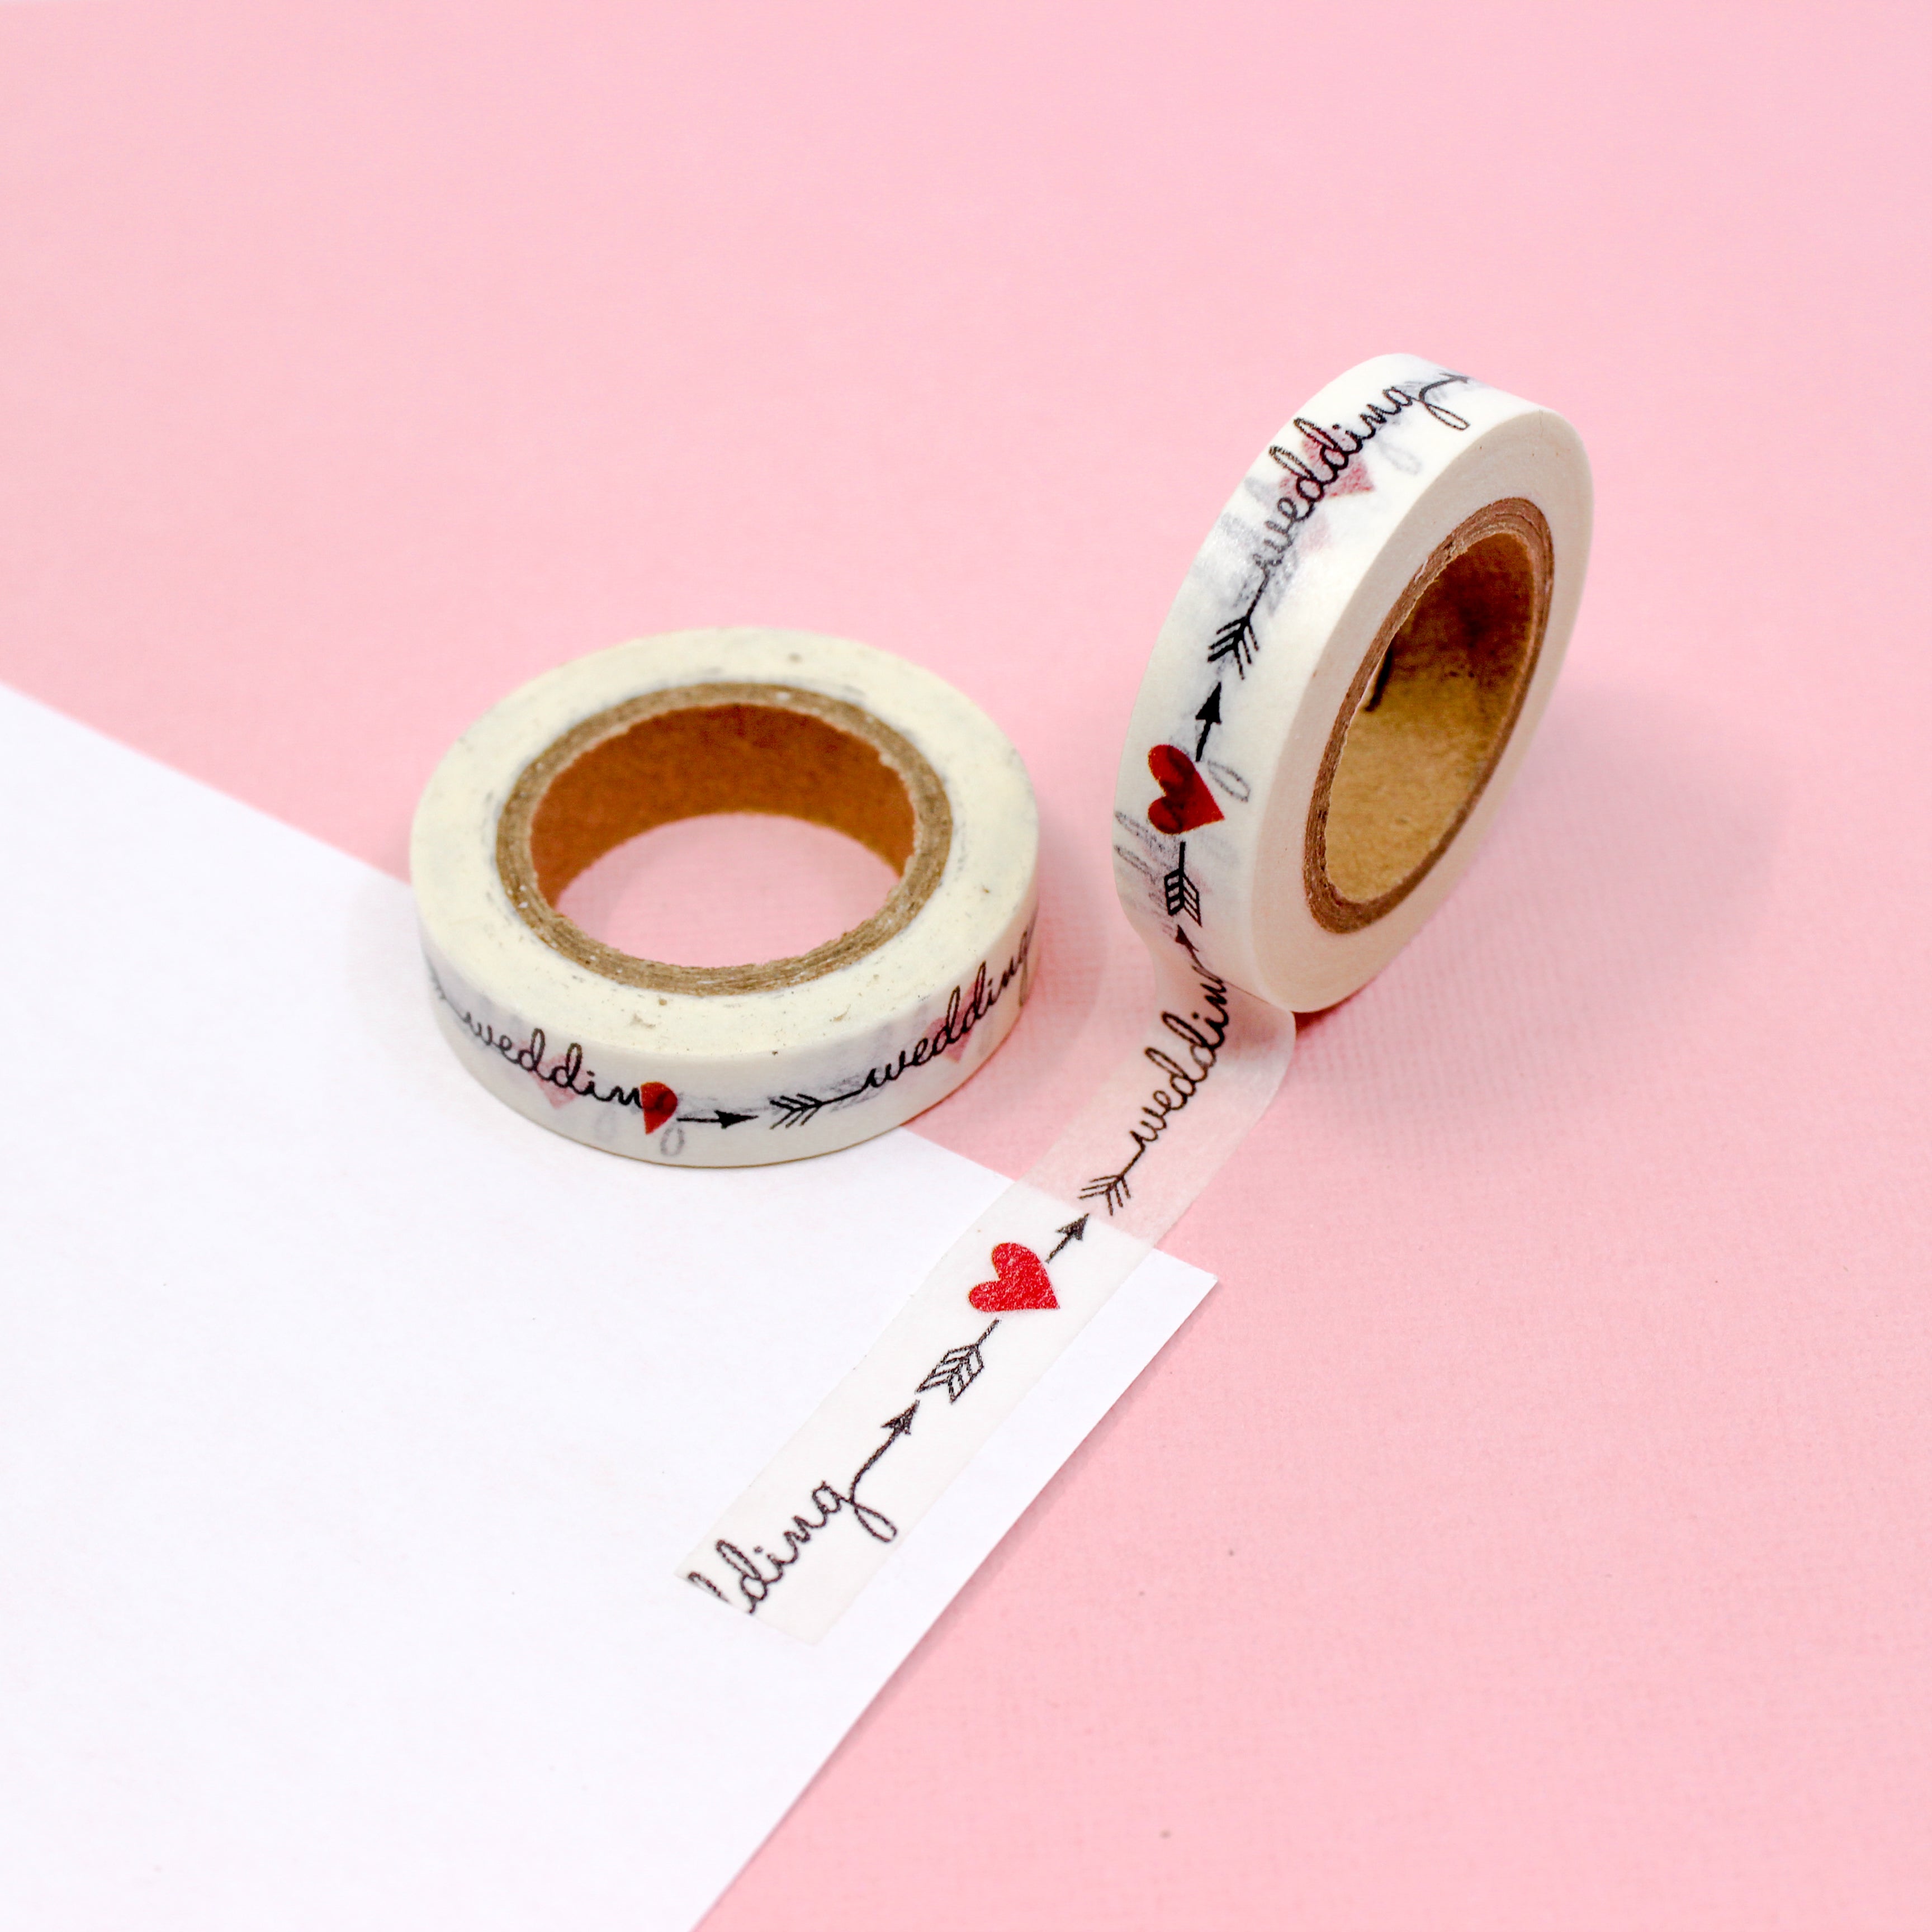 This is a cursive wedding text with thin arrow and hearts themed washi tape from BBB Supplies Craft Shop